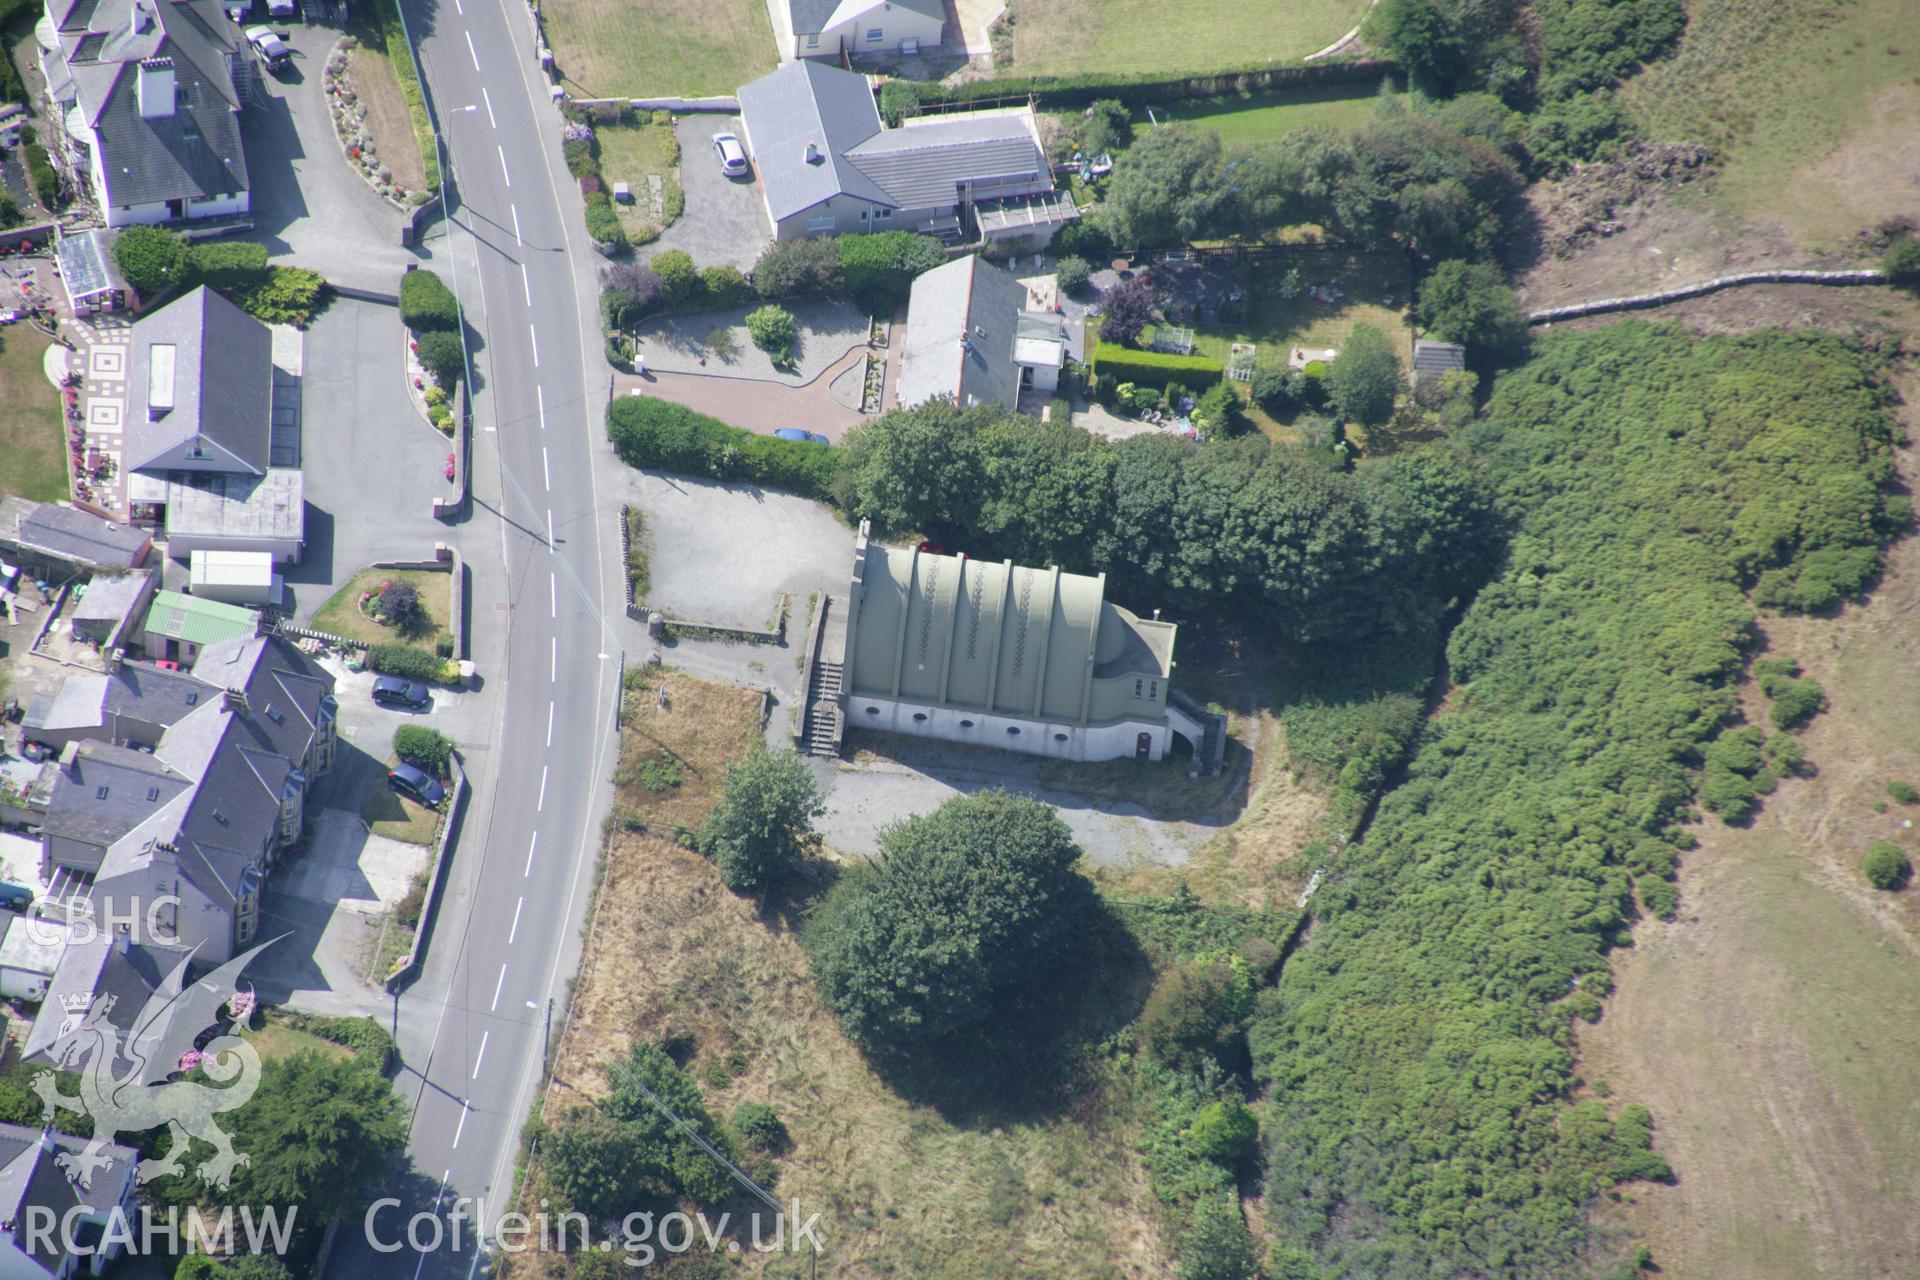 RCAHMW colour oblique aerial photograph of Church of Our Lady Star of The Sea, Amlwch. Taken on 14 August 2006 by Toby Driver.